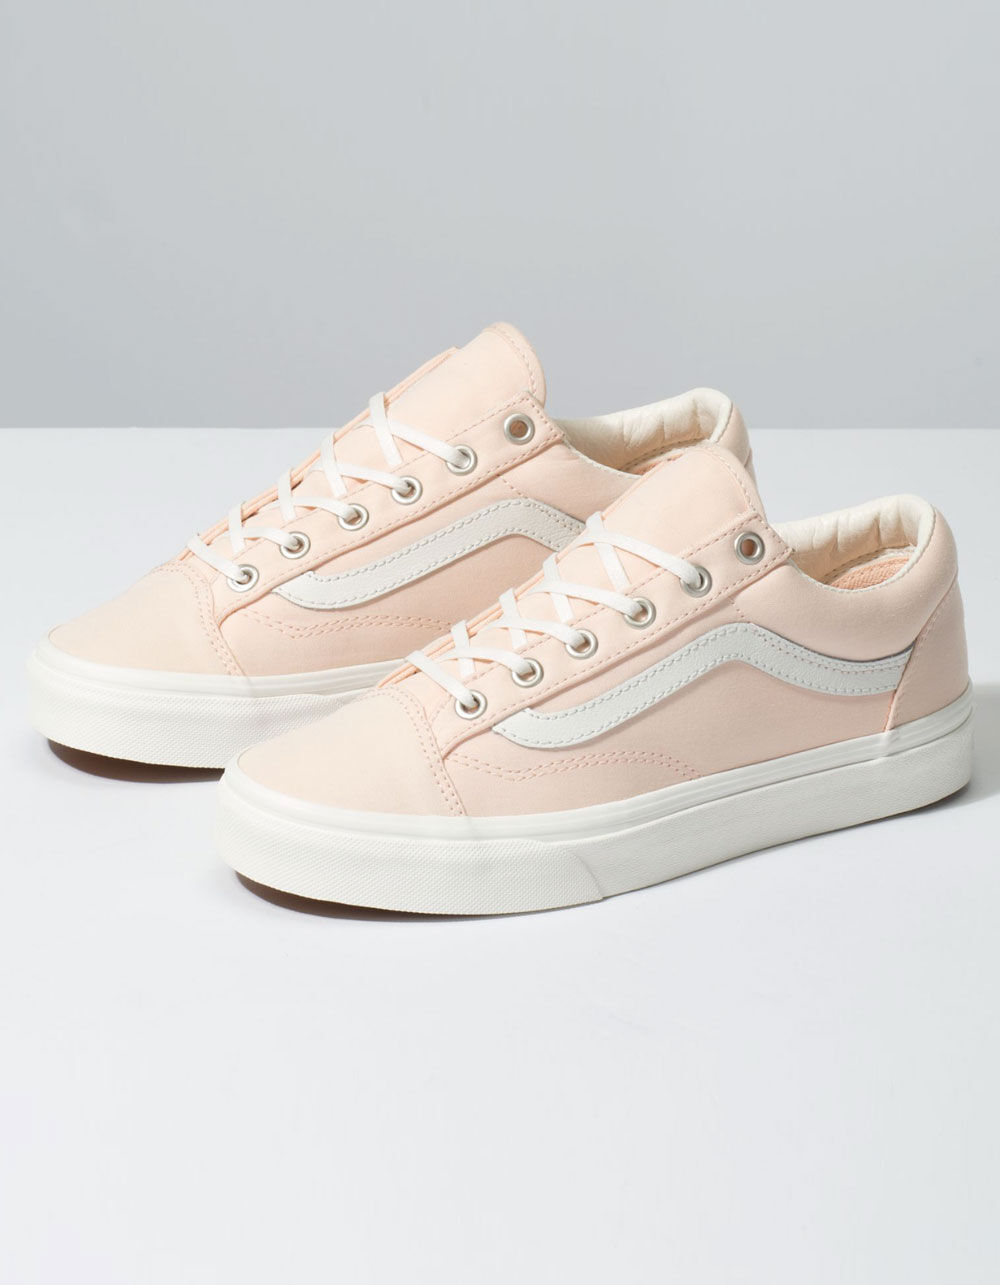 VANS Brushed Twill Style 36 Vanilla Cream & Snow White Womens Shoes ...